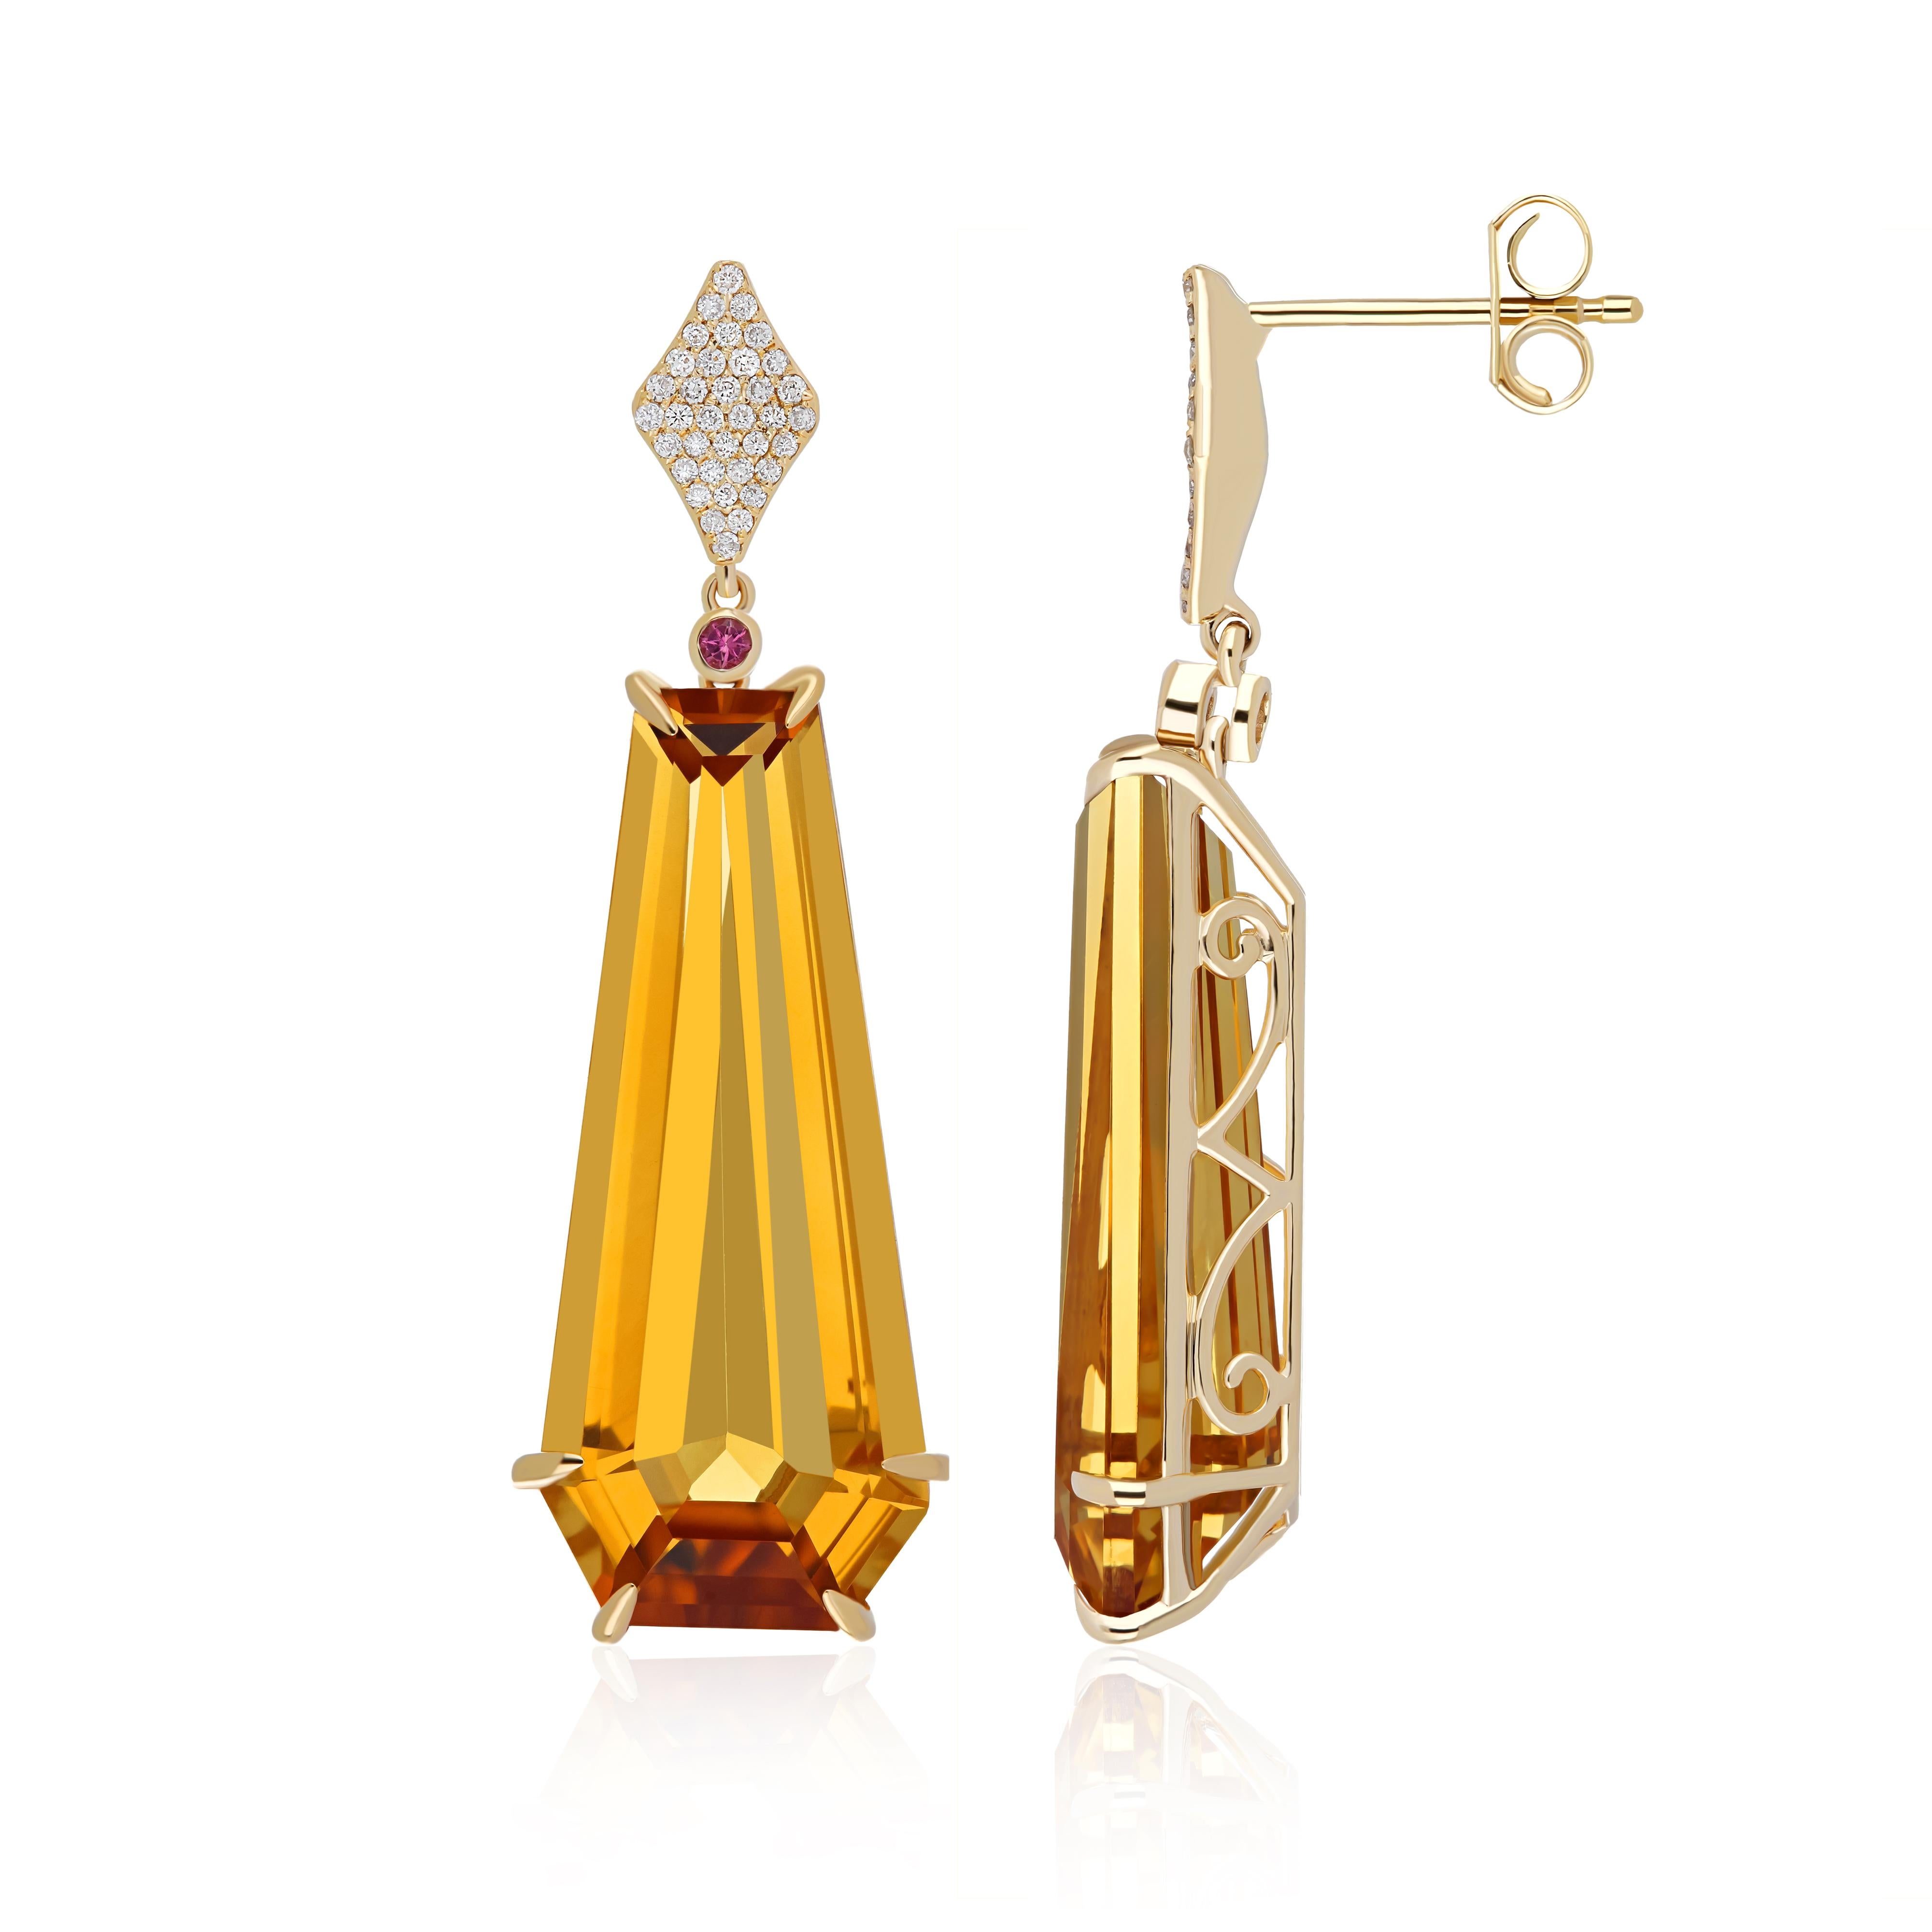 Elegant and Exquisitely Detailed Yellow Gold Earring set with Fancy Shape Citrine weighing approx. 19.60Cts (Total) and with micro prove set Diamonds weighing approx. 0.25Cts Beautifully Hand Crafted in 
14Karat, Yellow Gold Earring.

Product